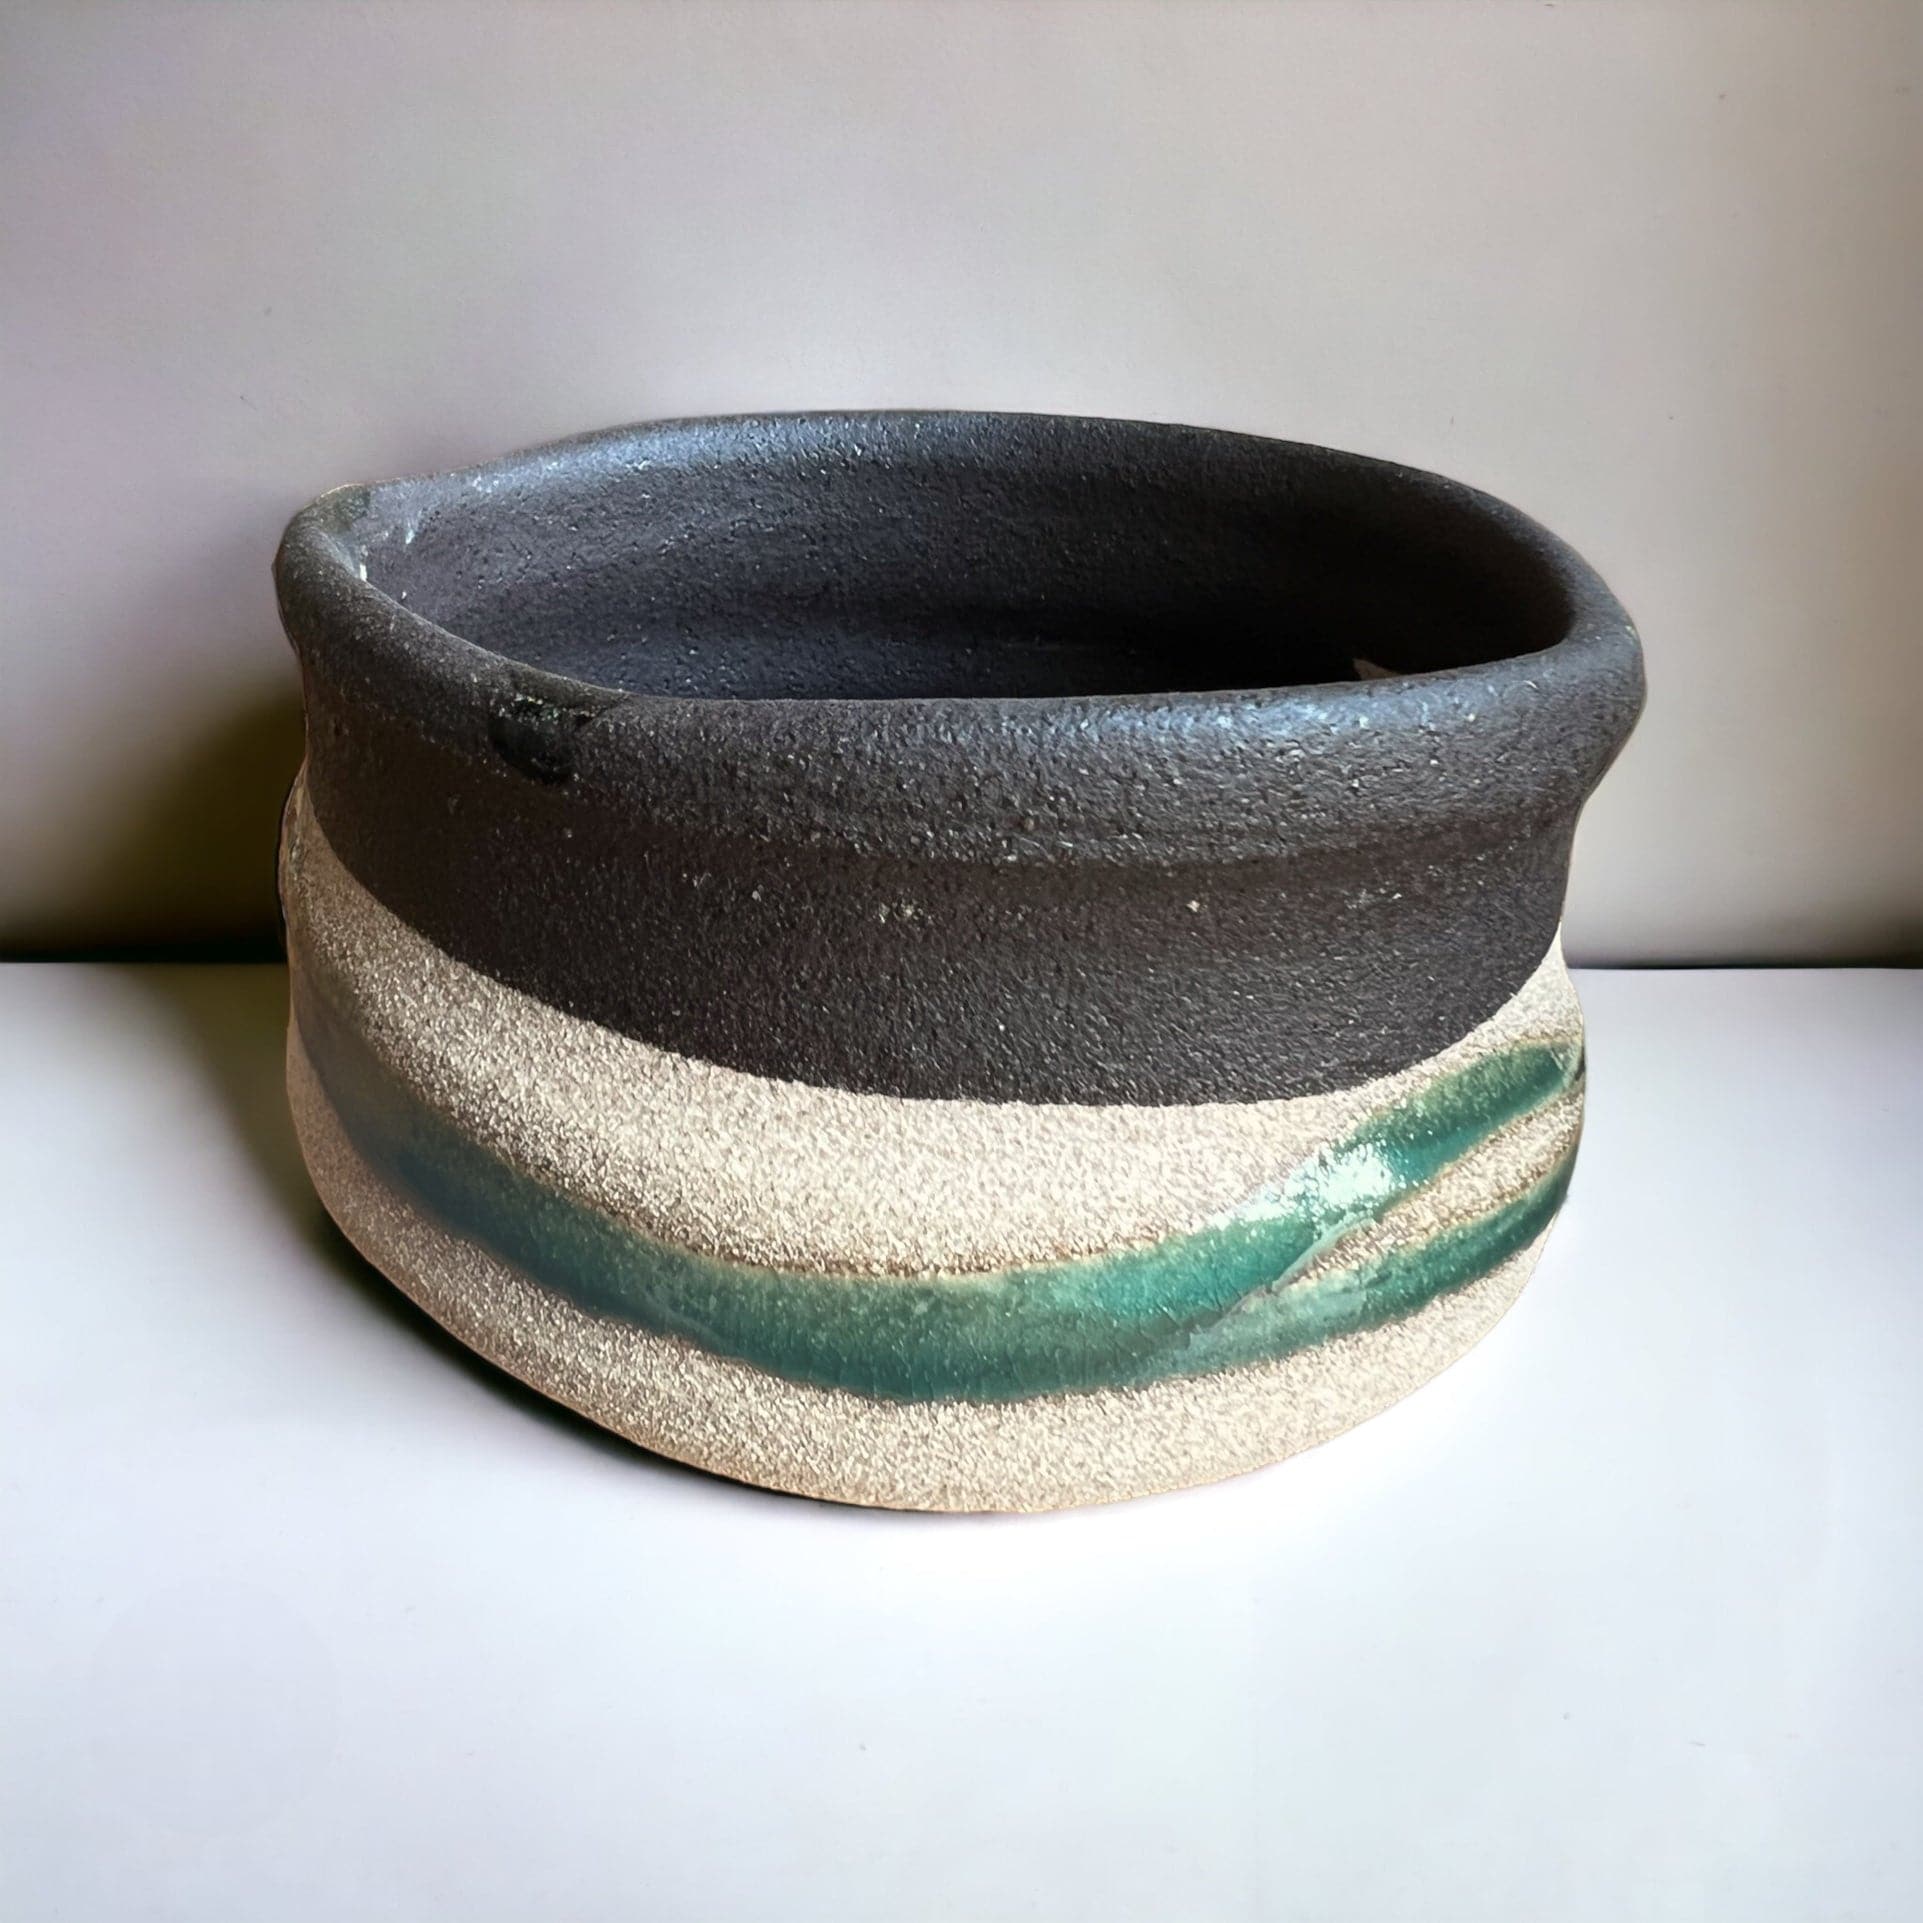 The other side of the Hand Made River Sand Matcha Bowl.